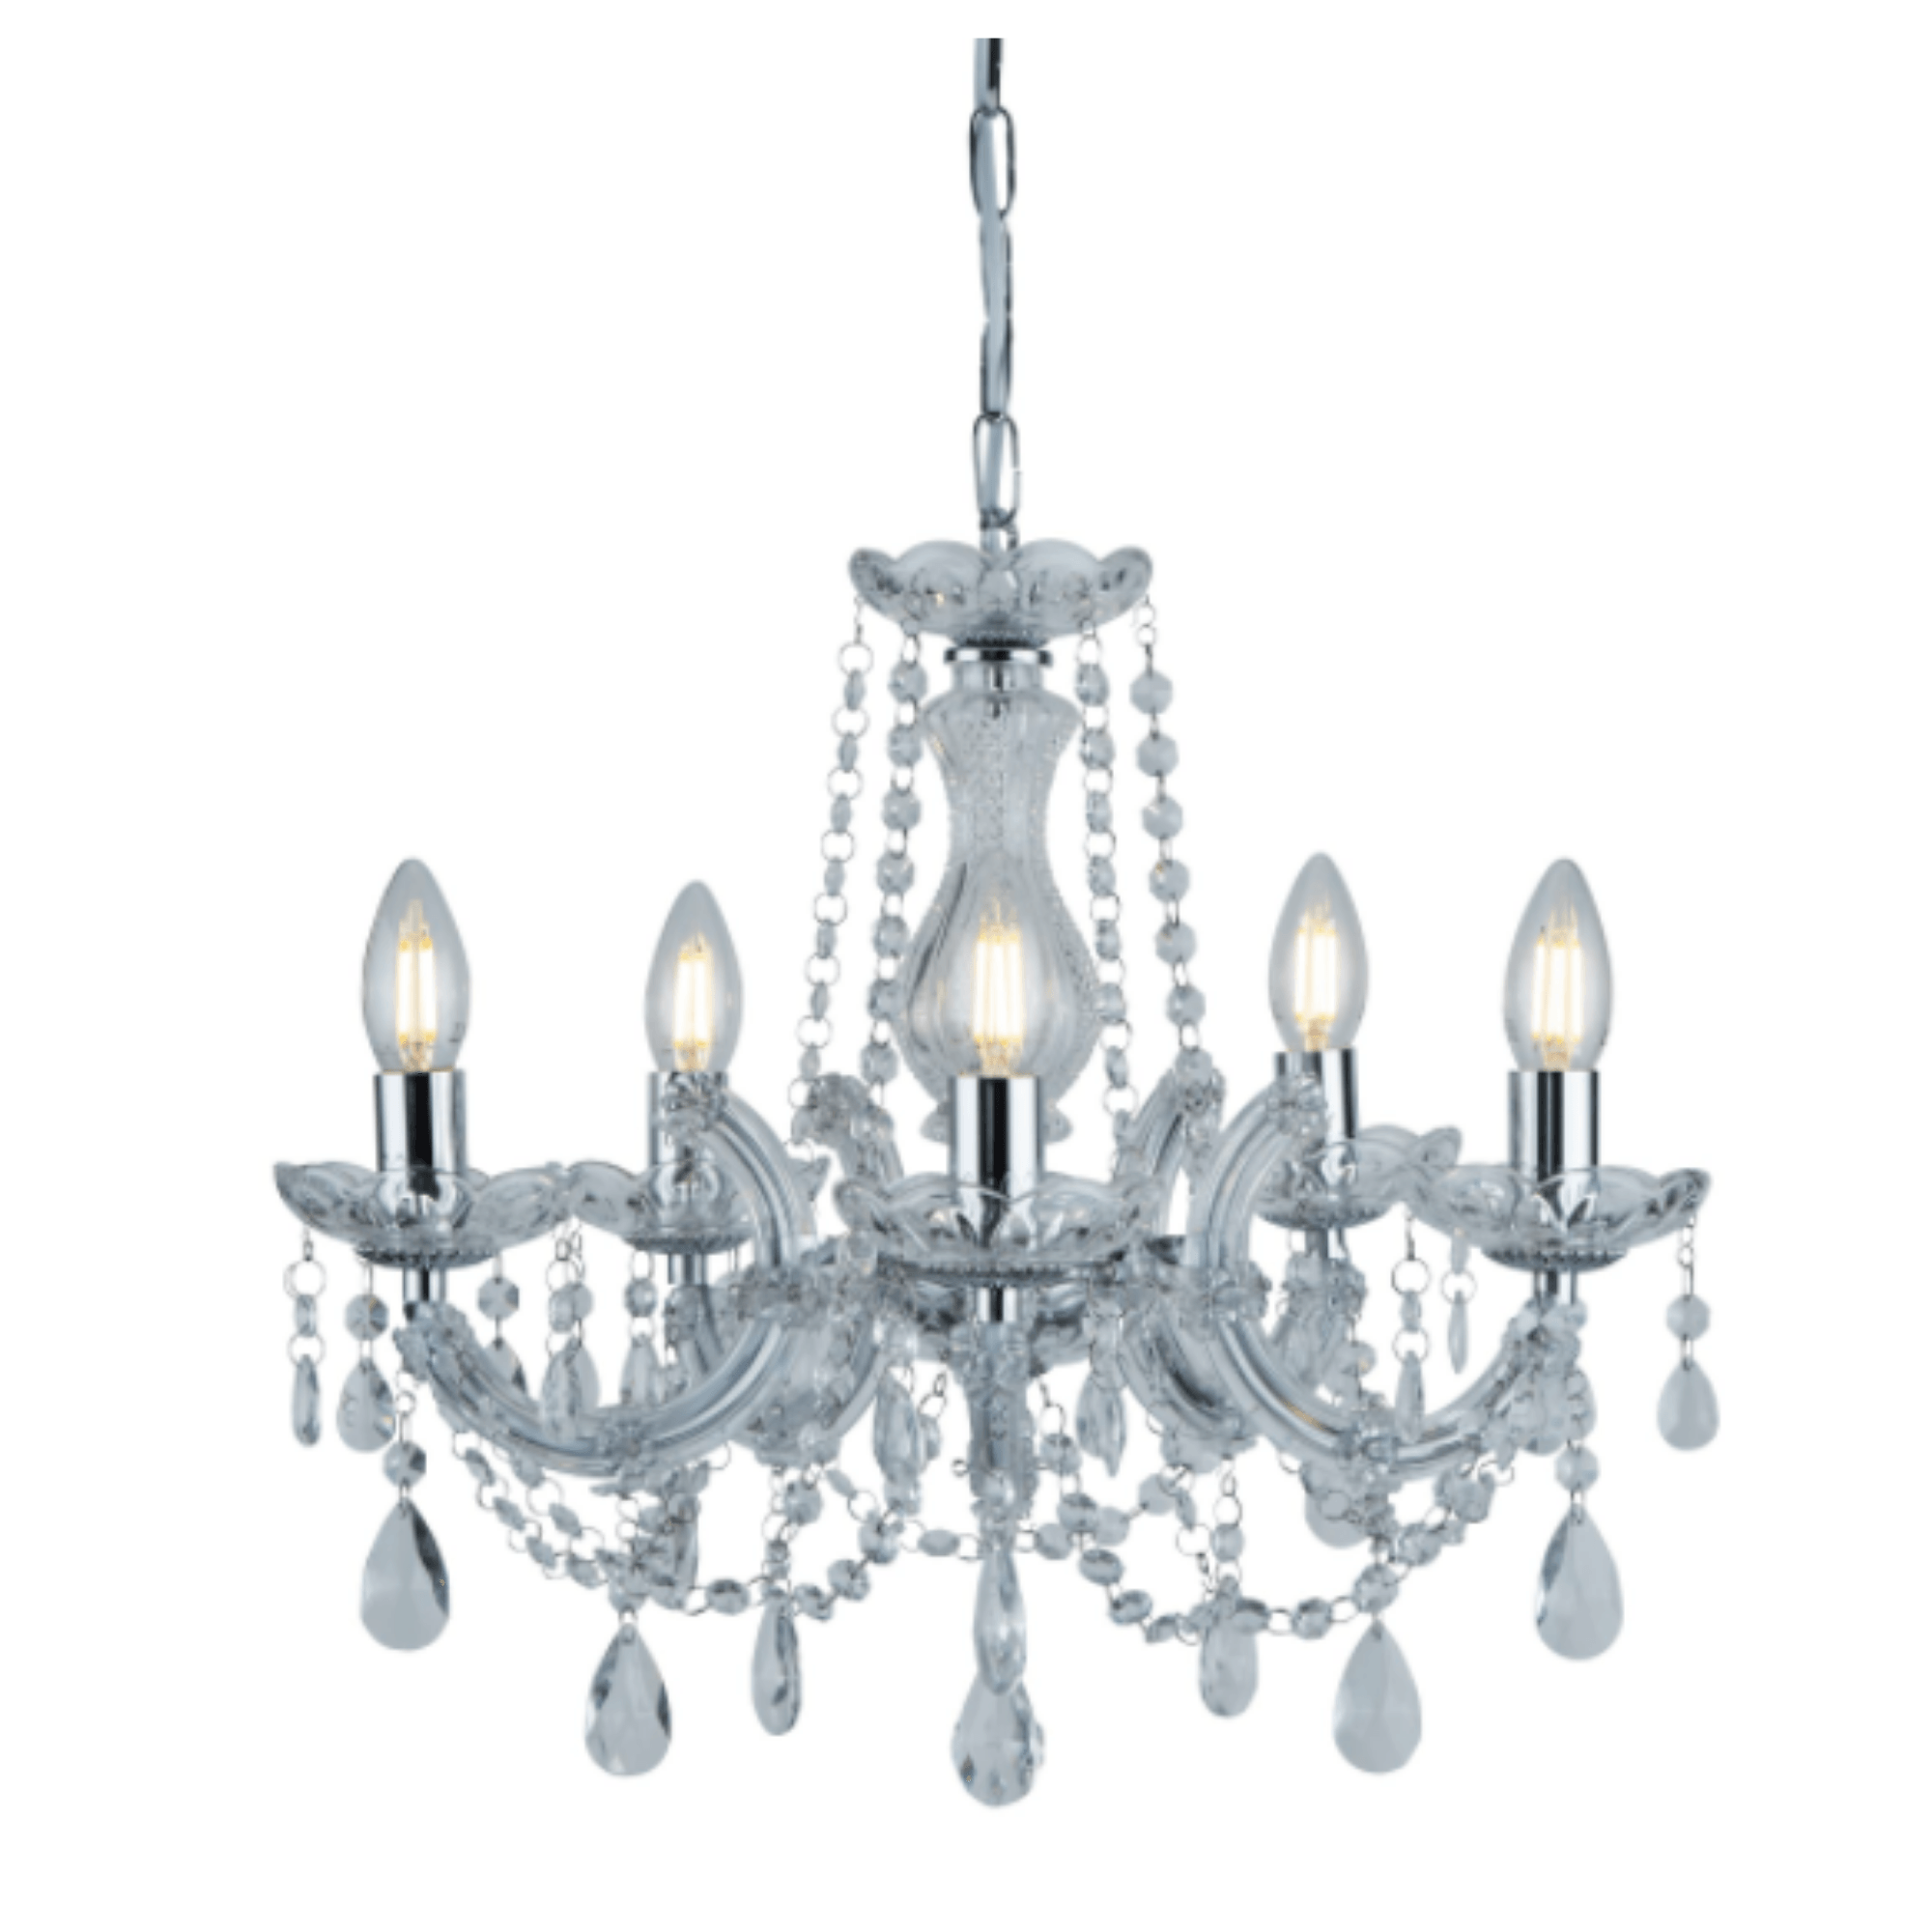 399-5 CHANDELIER LIGHT FITTING MARIE THERESE - Cusack Lighting